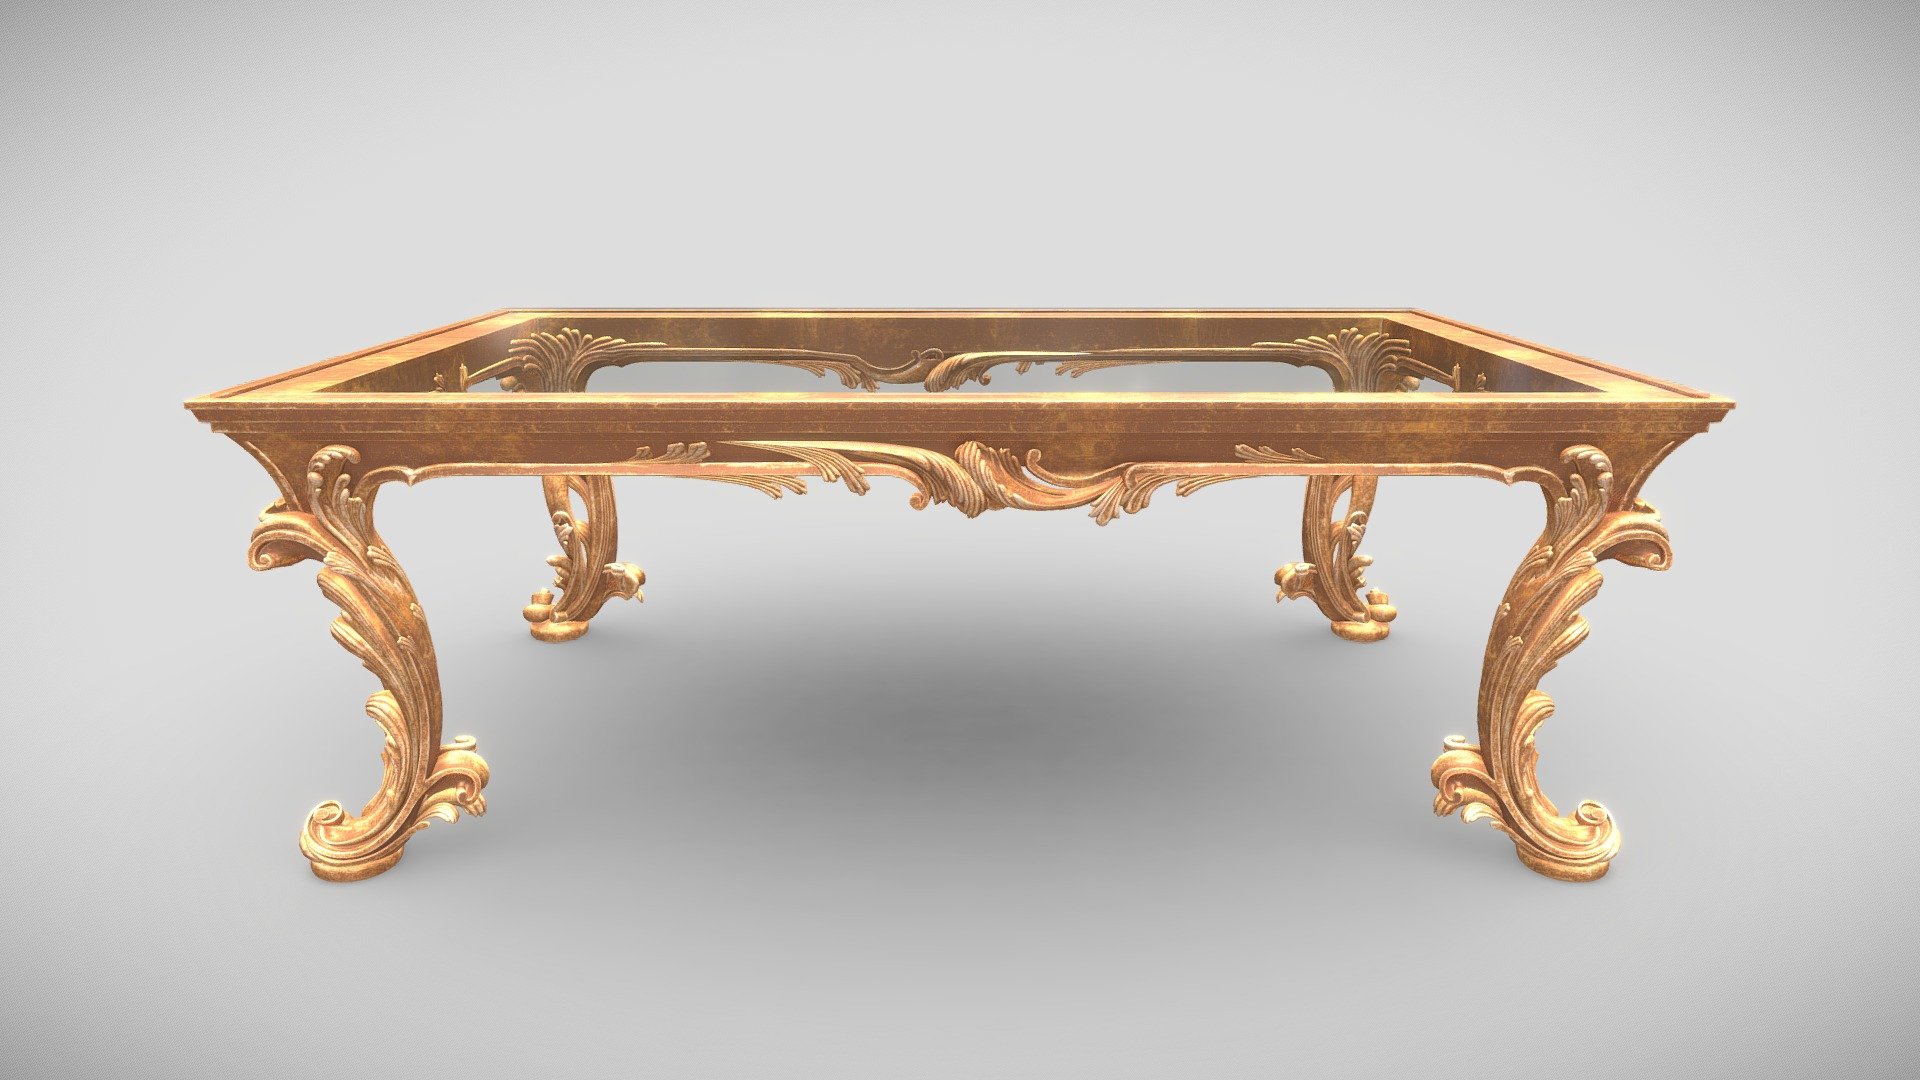 High quality, photorealistic 3D model based on Chelini Art.1064 - coffee table

Additional formats on purchase:

3DSMax2010 and up:




Modeled in real-world scale.

Accurate dimensions in cm.

The model is fully unwrapped (non-overlapping) and textured.

4k textures are used for the frame with micro details and hand painted aged wear (made with Substance Painter).

There are two sets of 4k textures including diffuse/spec, gloss and normal maps.

No background objects, cameras and lights in the scene - drag and drop ready.

Objects and materials are properly named and organized.

Polycount - no subdivisions:
Polys: 144,524
Verts: 145,962

Polycount - subdivision level 1:
Polys: 1,109,138
Verts: 560,434

V-Ray only version

Exported Formats: FBX, OBJ - files contain not subdivided version and only basic materials 3d model